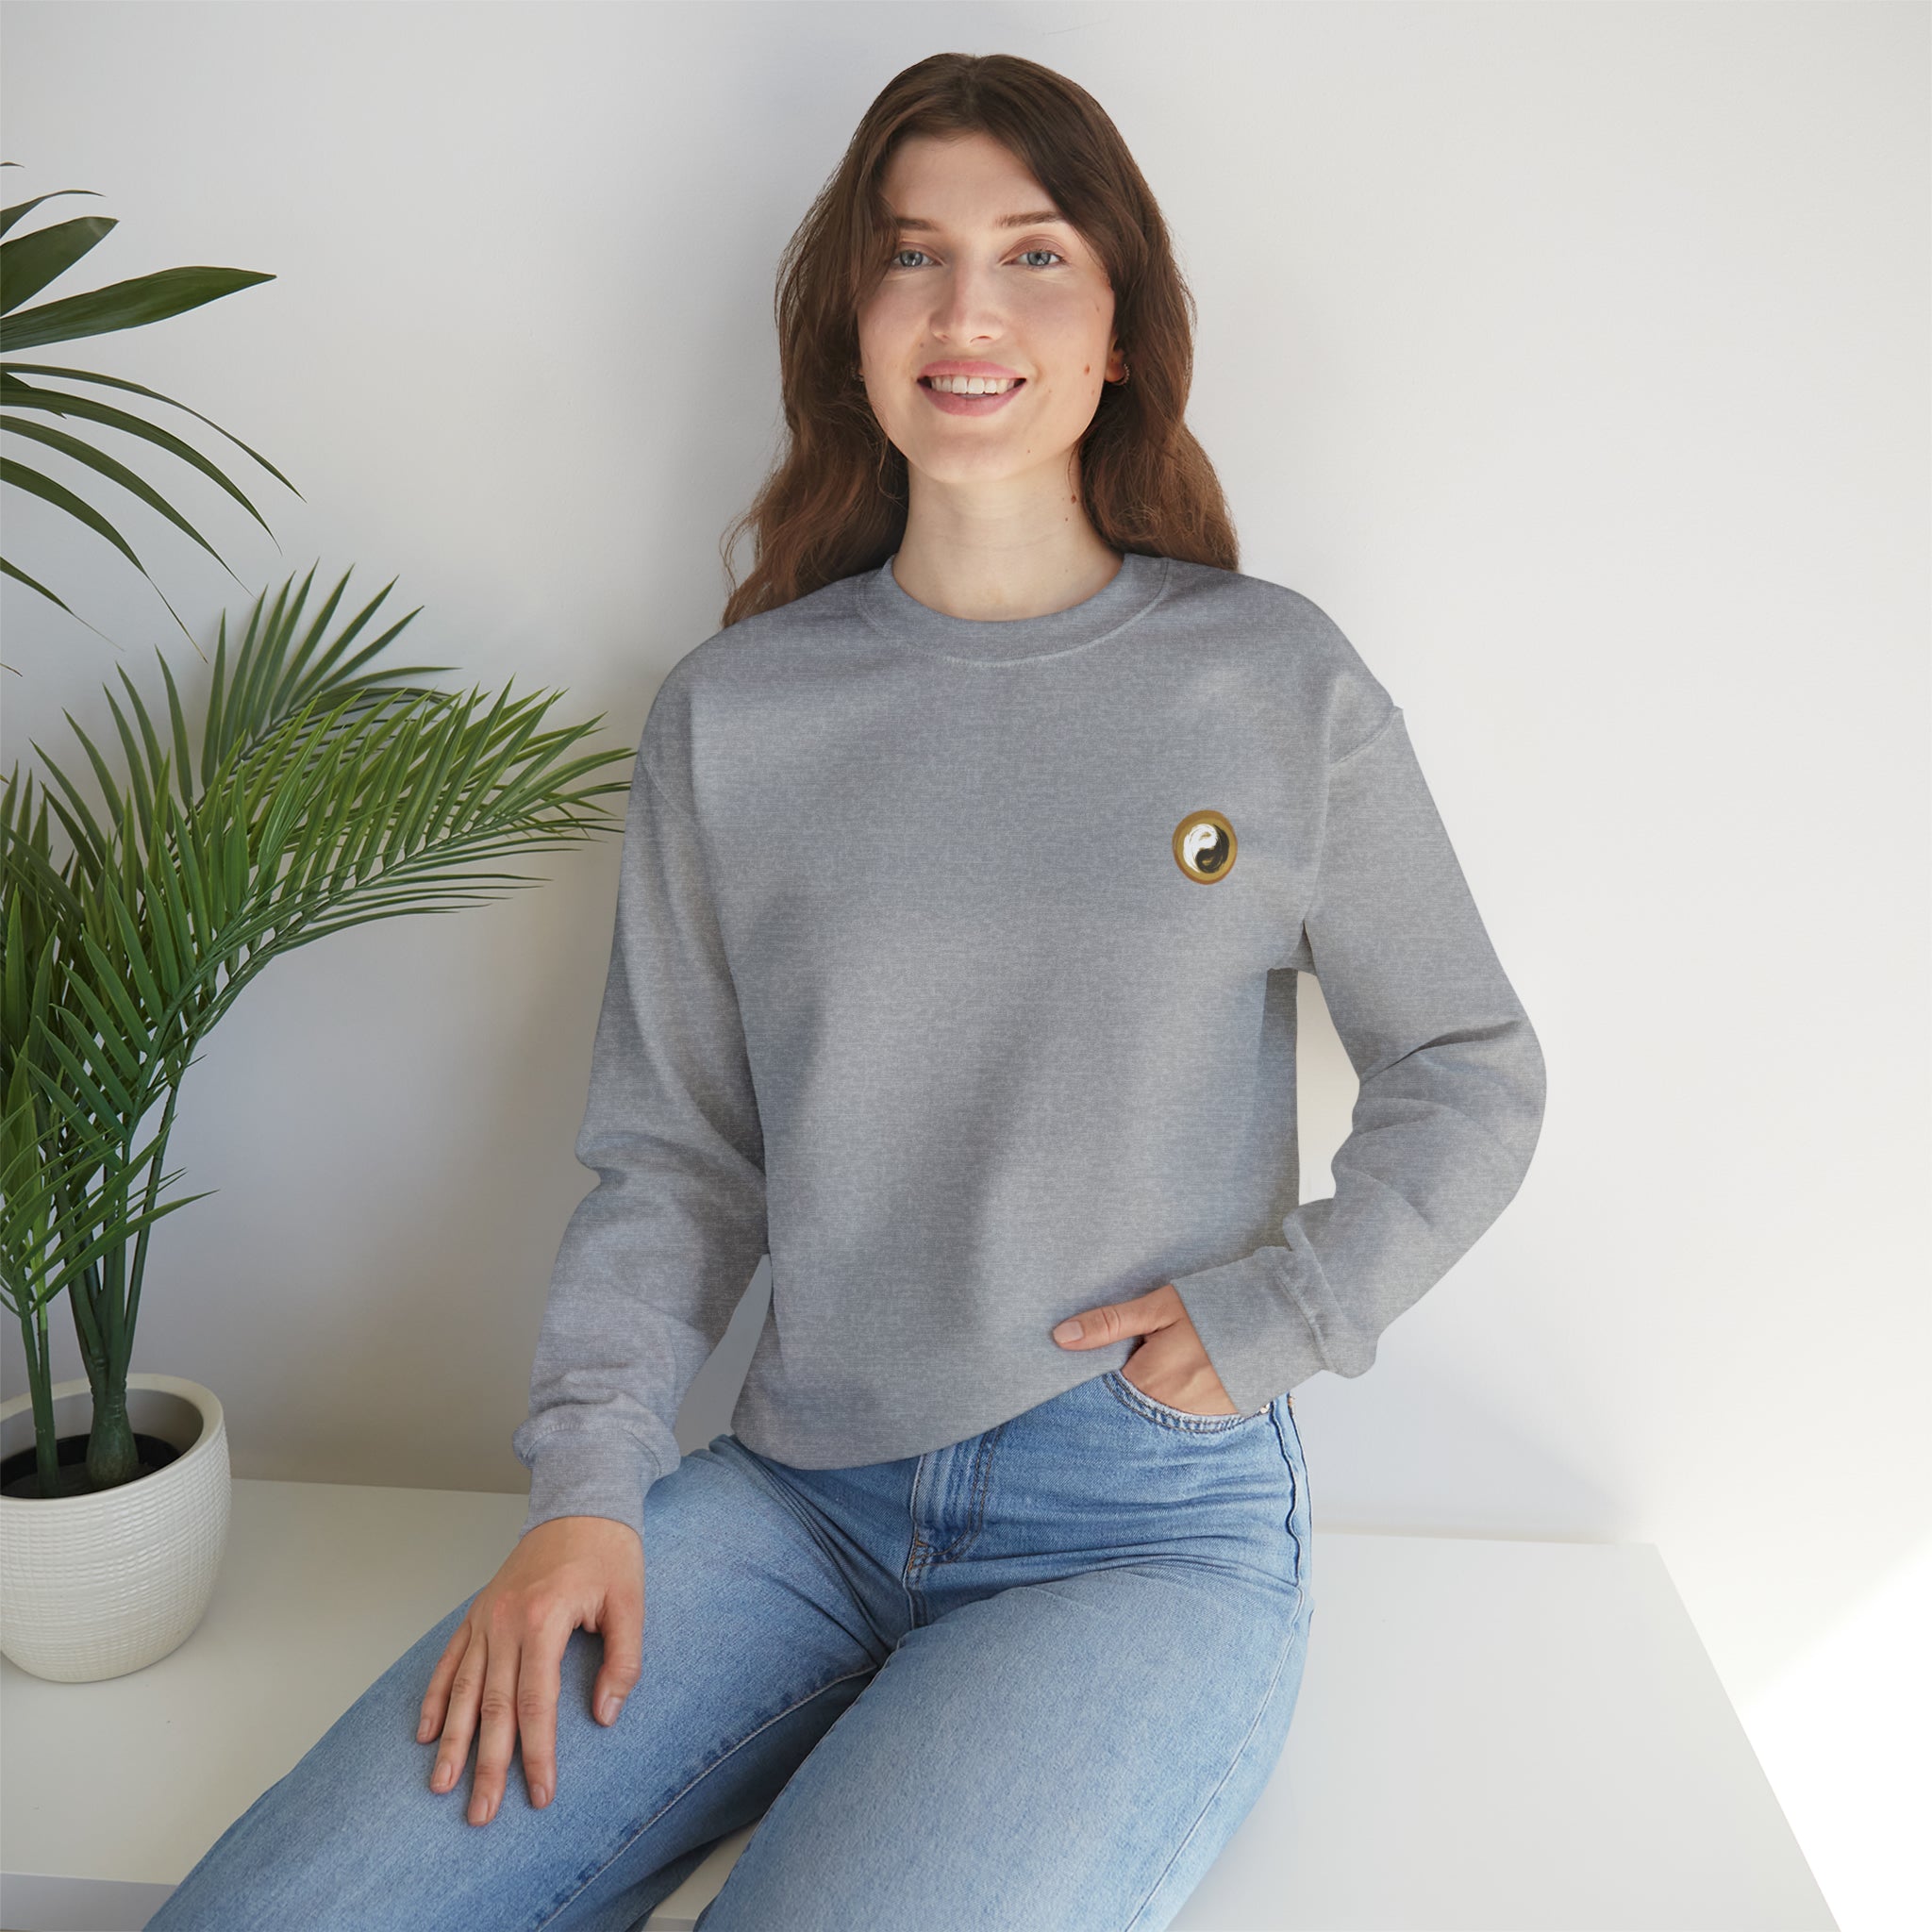 Unisex Heavy Blend Crewneck Sweatshirt - PersonalHour Style - Personal Hour for Yoga and Meditations 